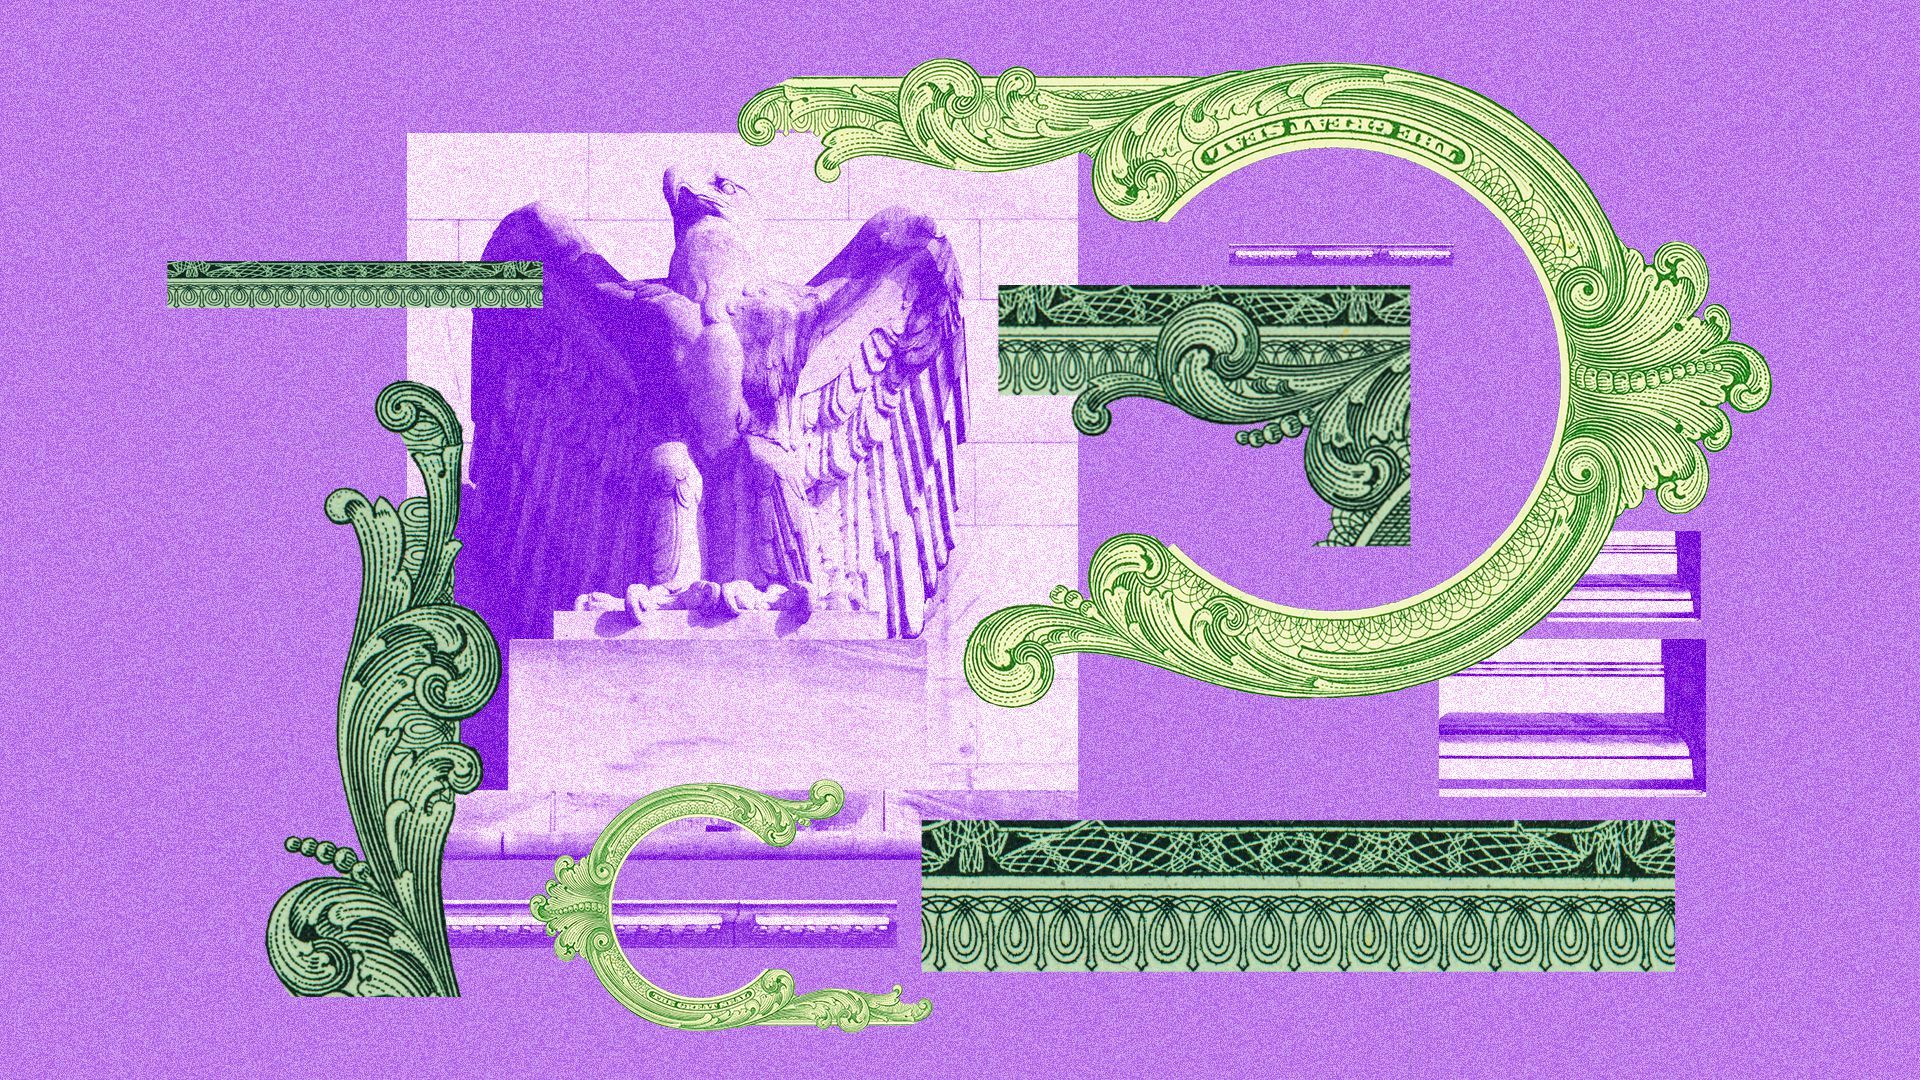 Photo illustration of money elements and the Federal Reserve building.